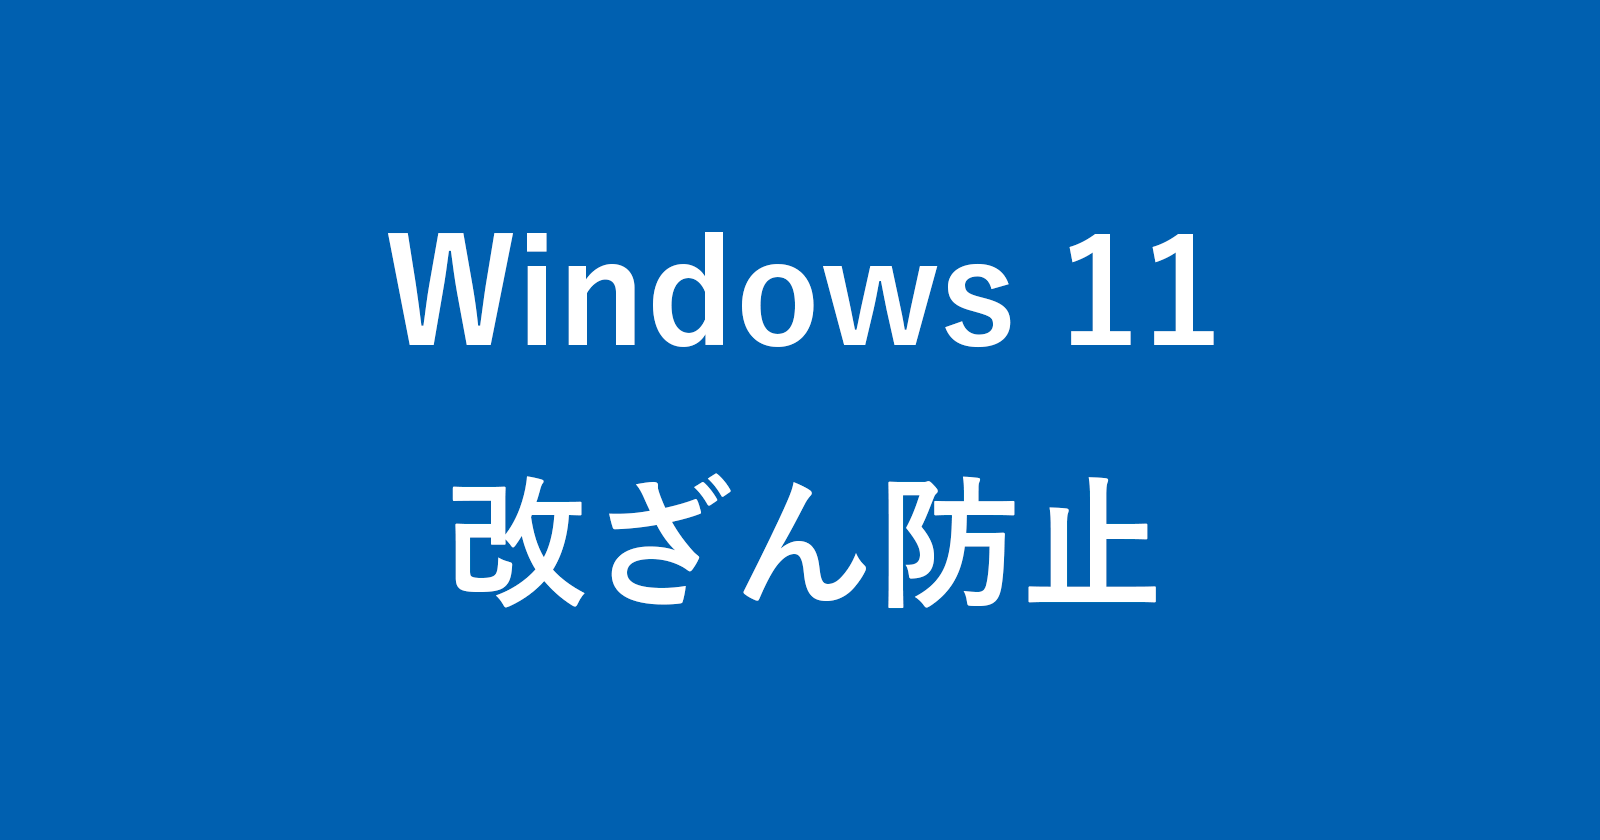 windows 11 tamper protection